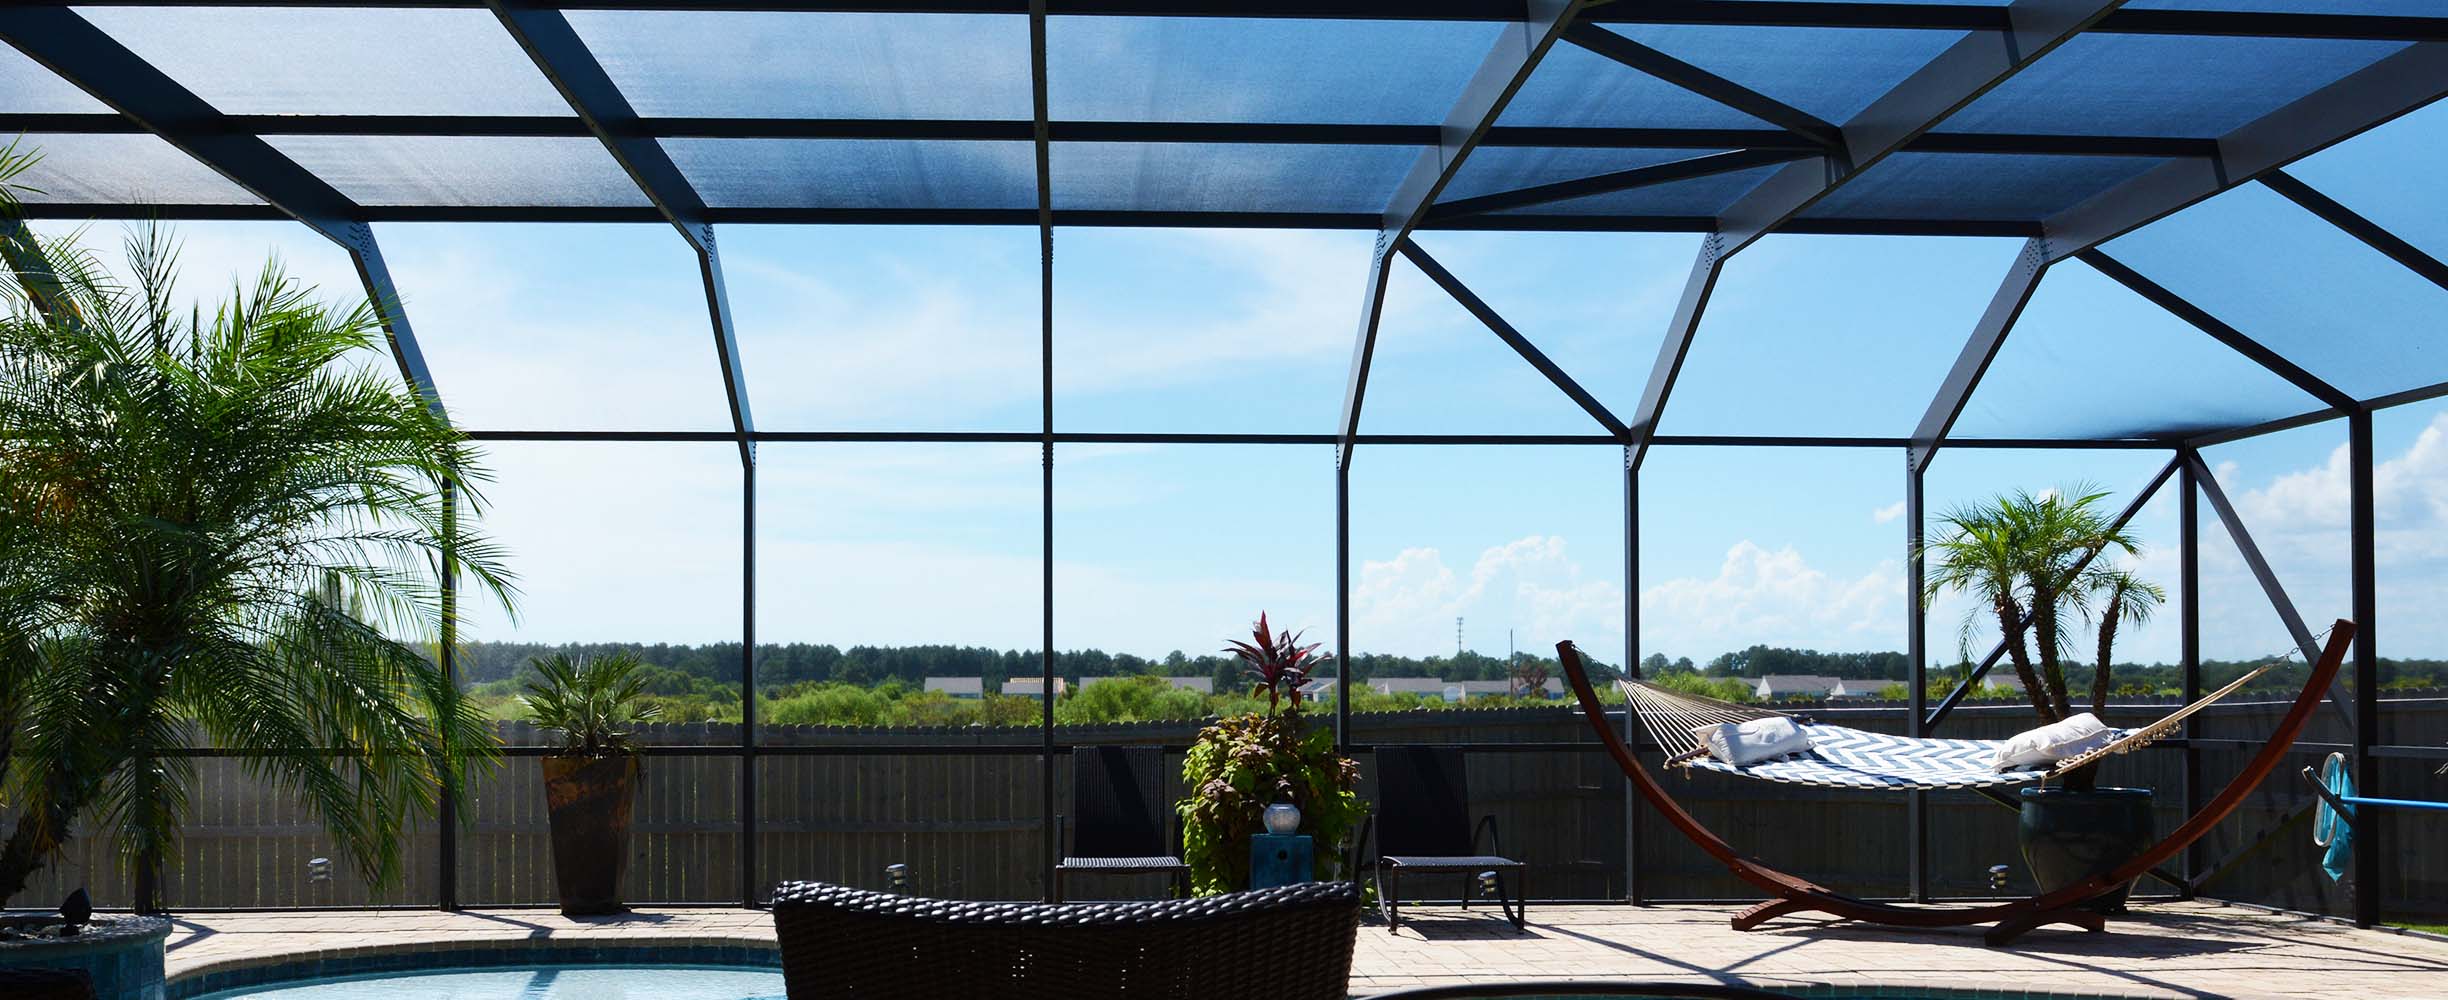 Pool enclosure designed and built to southern weather standards in Foley, Alabama